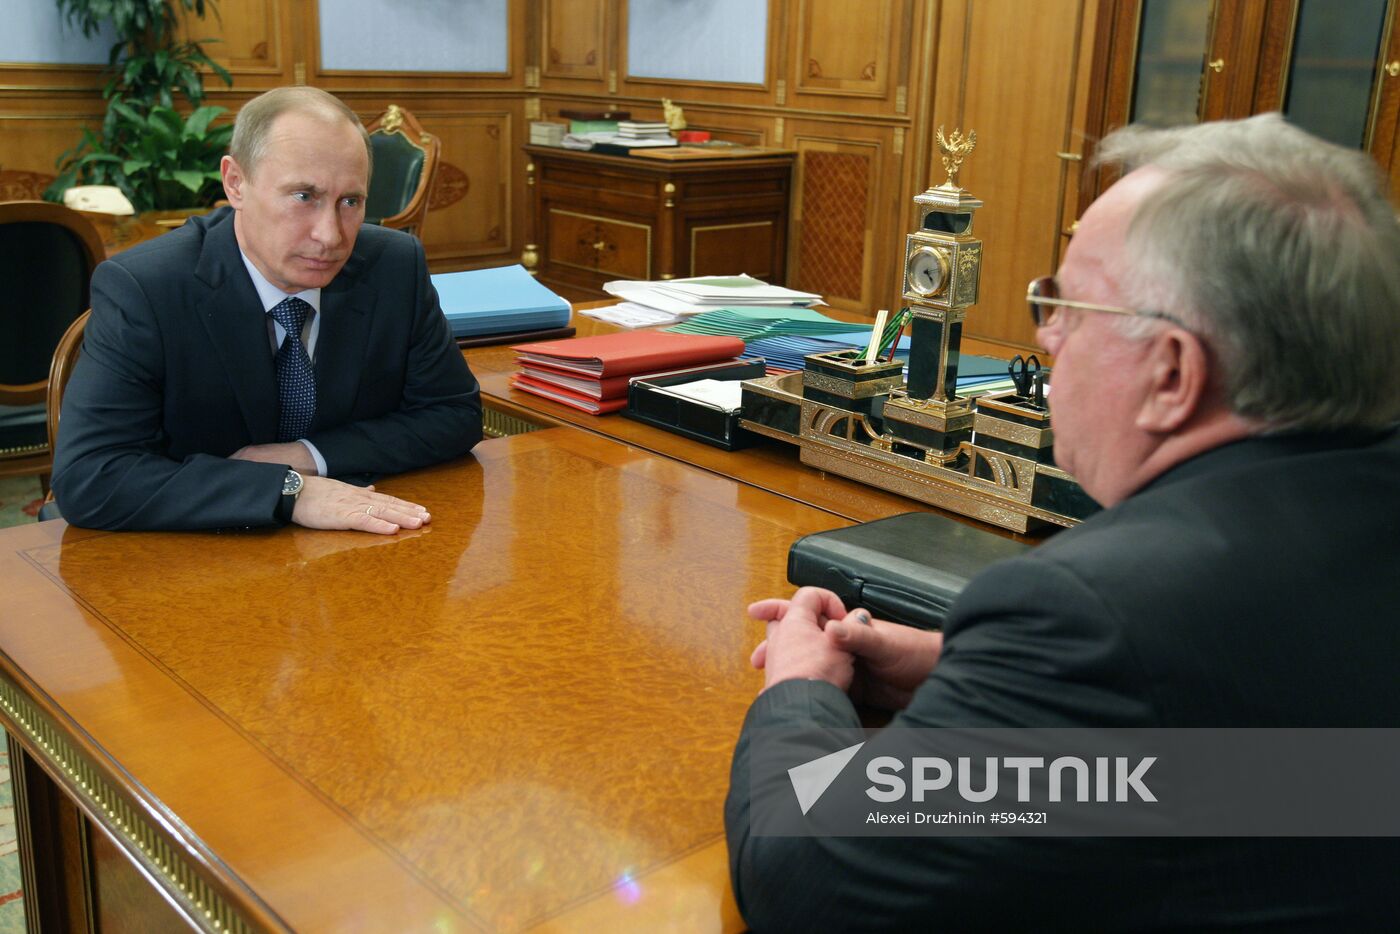 Vladimir Putin conducts several meetings on March 9, 2010